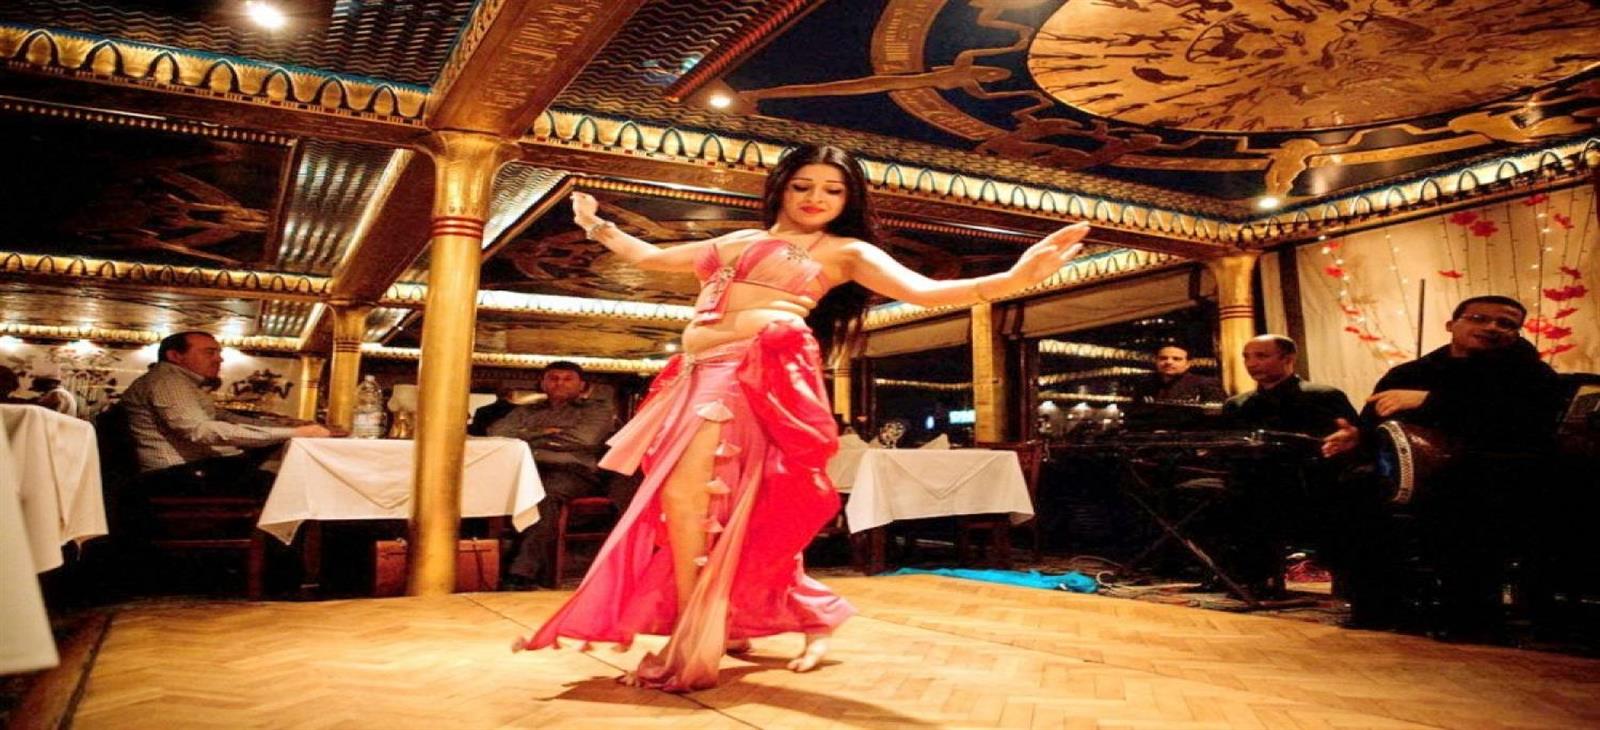 belly dance shows in cairo